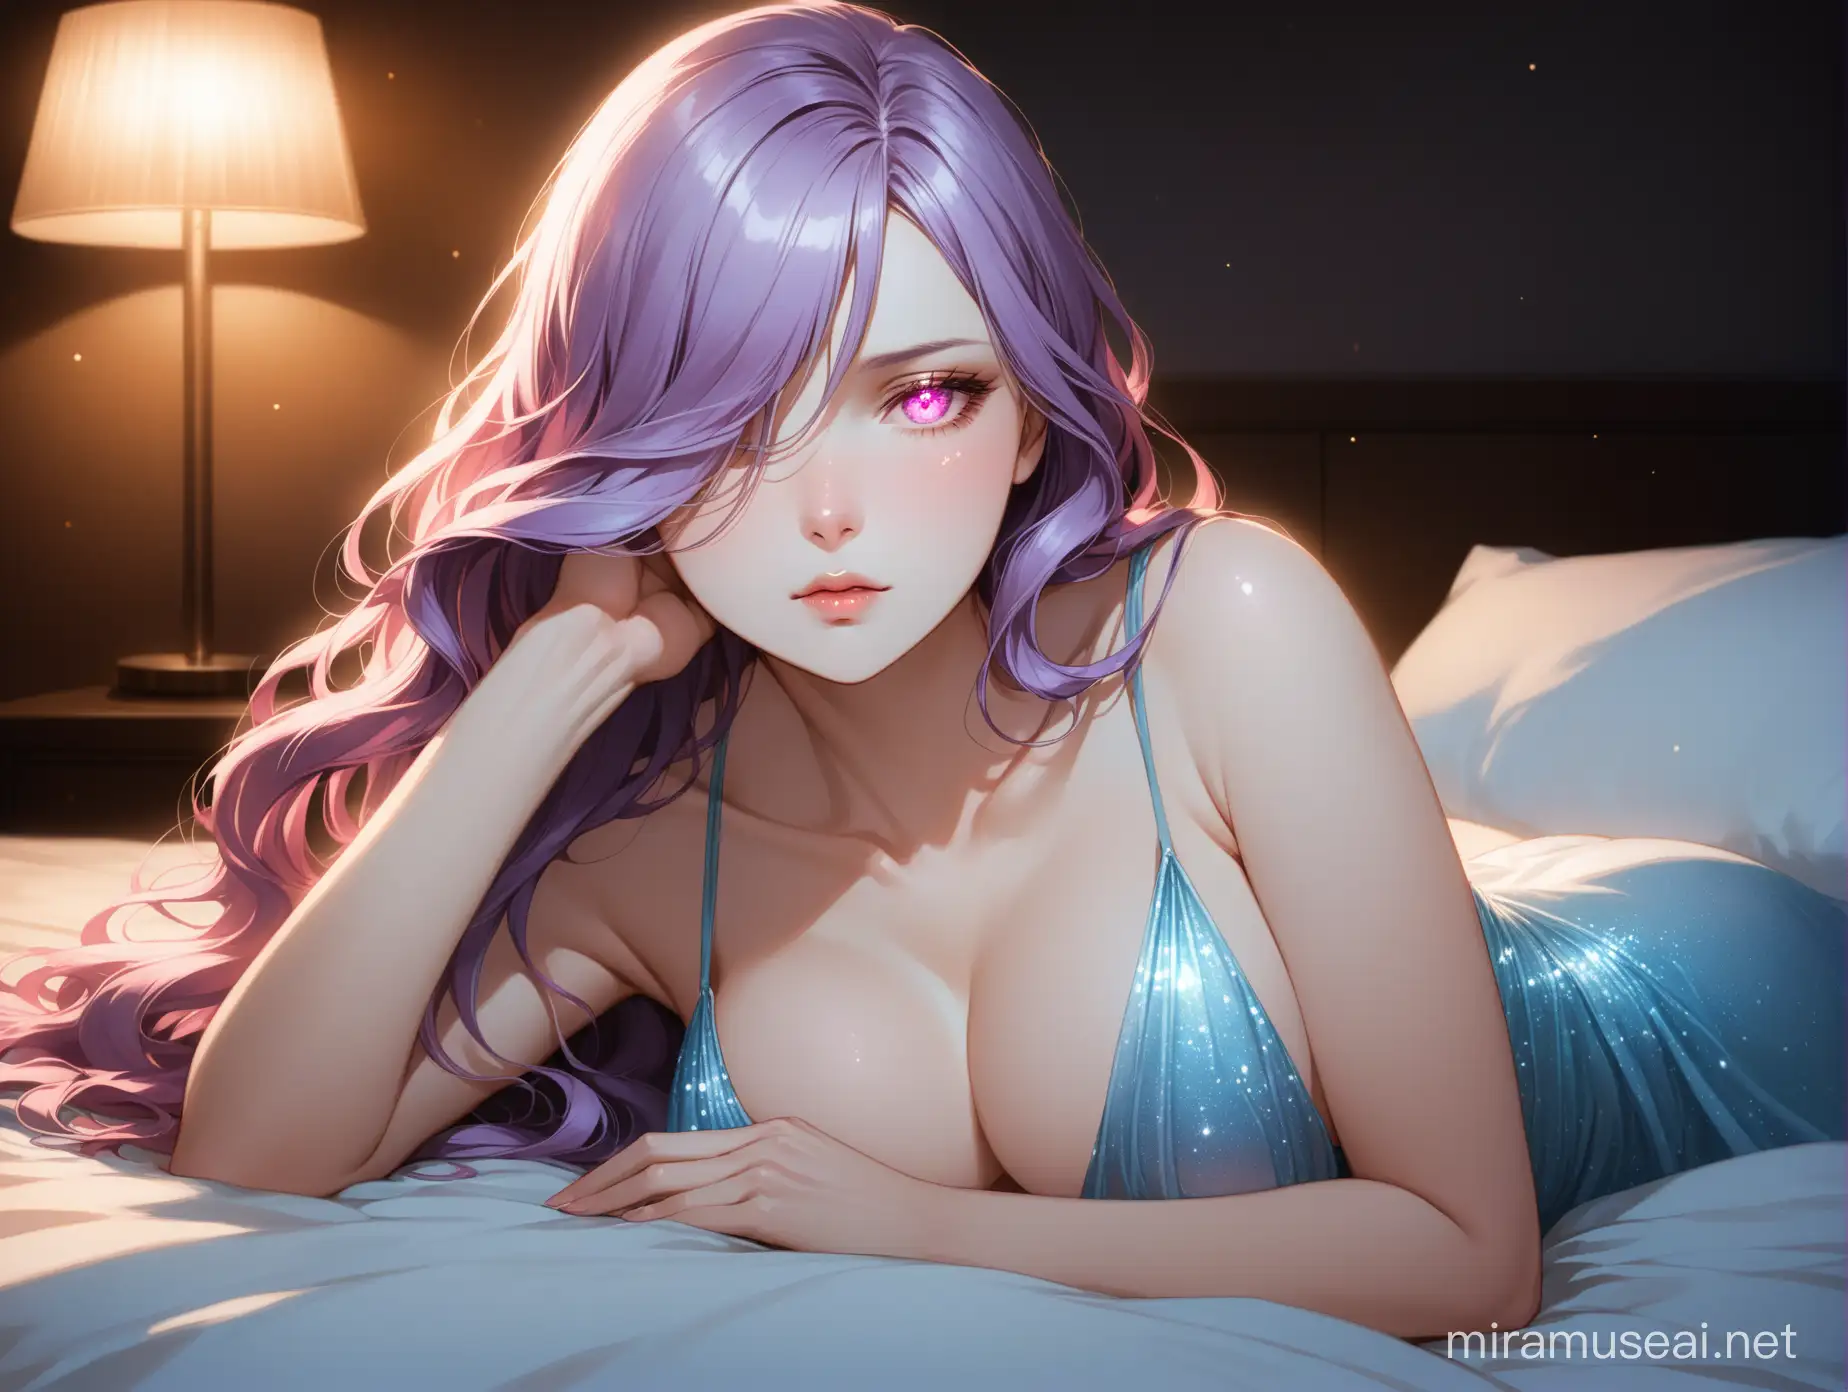 Seductive VioletHaired Woman Relaxing in Dimly Lit Hotel Room